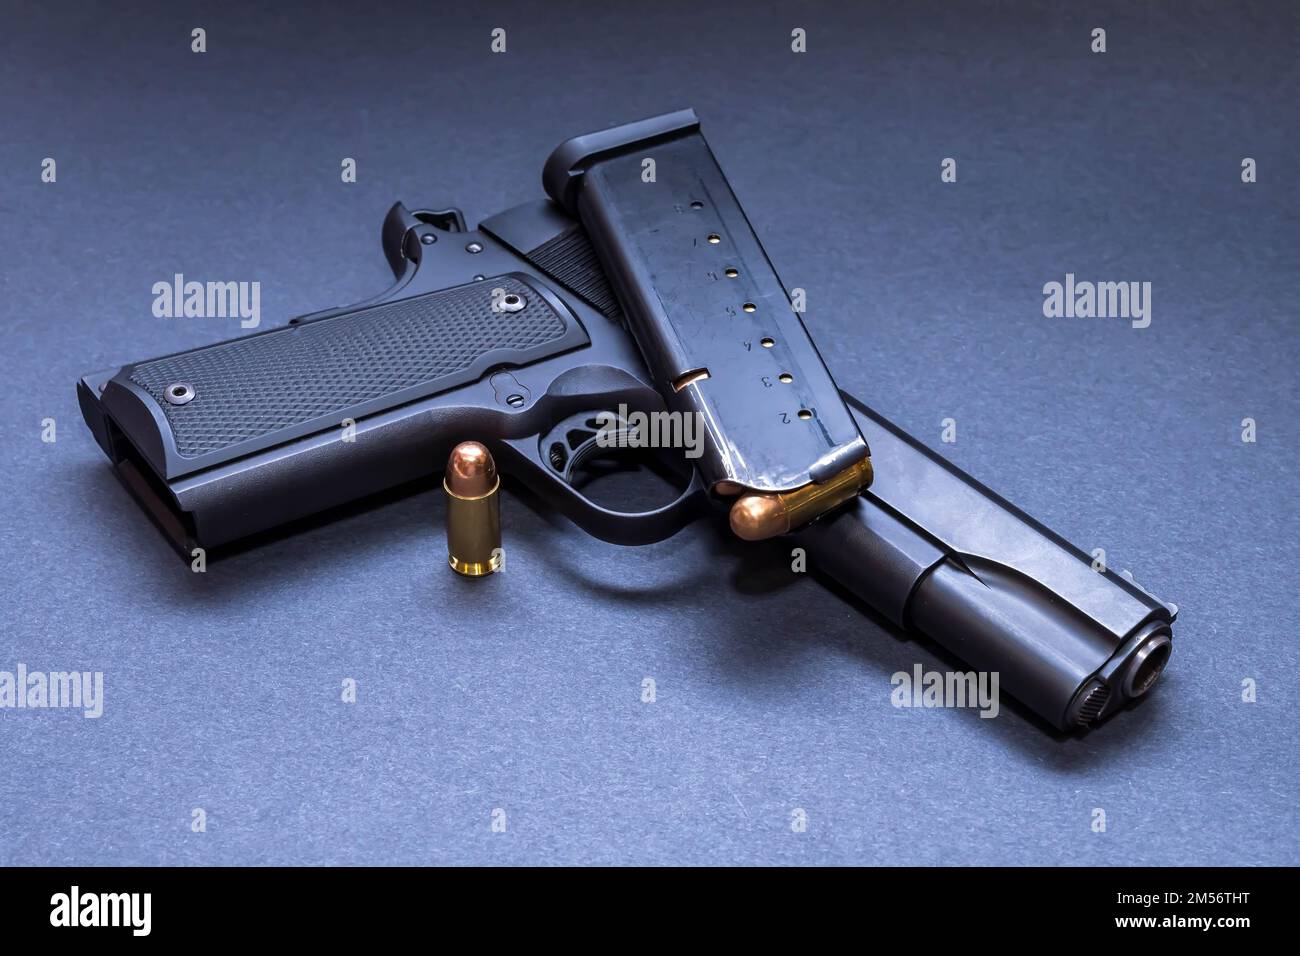 A 45 caliber 1911 model pistol with a loaded magazine on top of it and another bullet next to it with a dark background Stock Photo